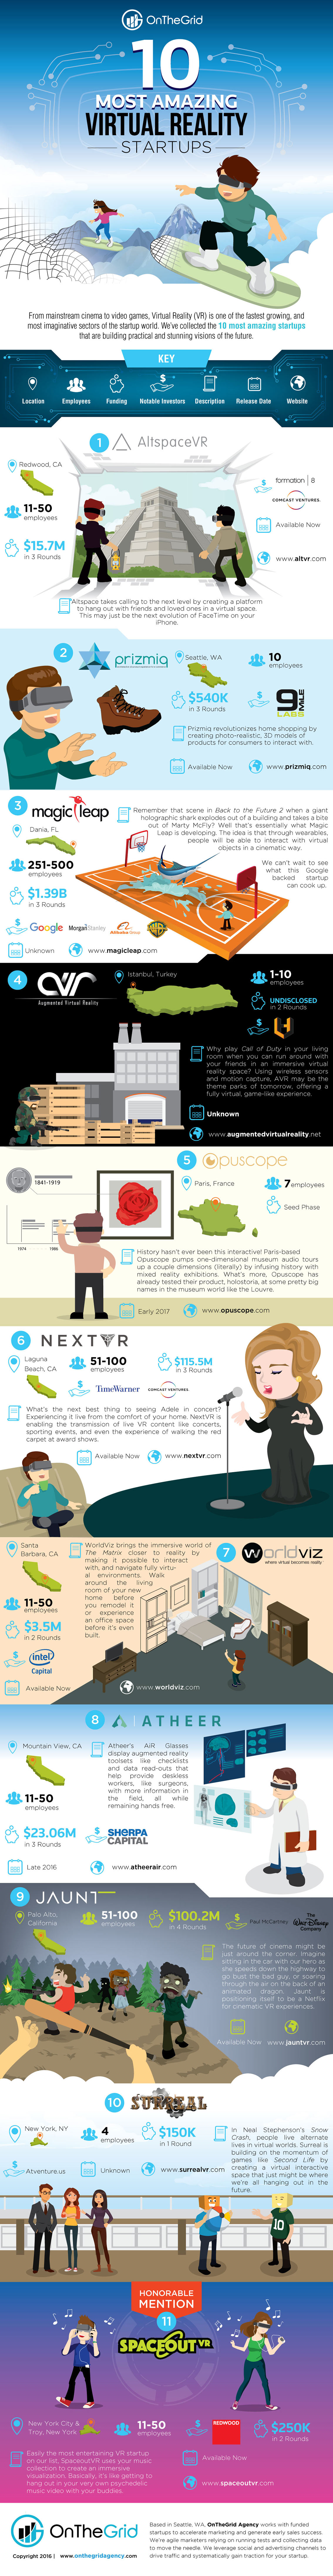 Awesome Virtual Reality Startups - Business Infographic